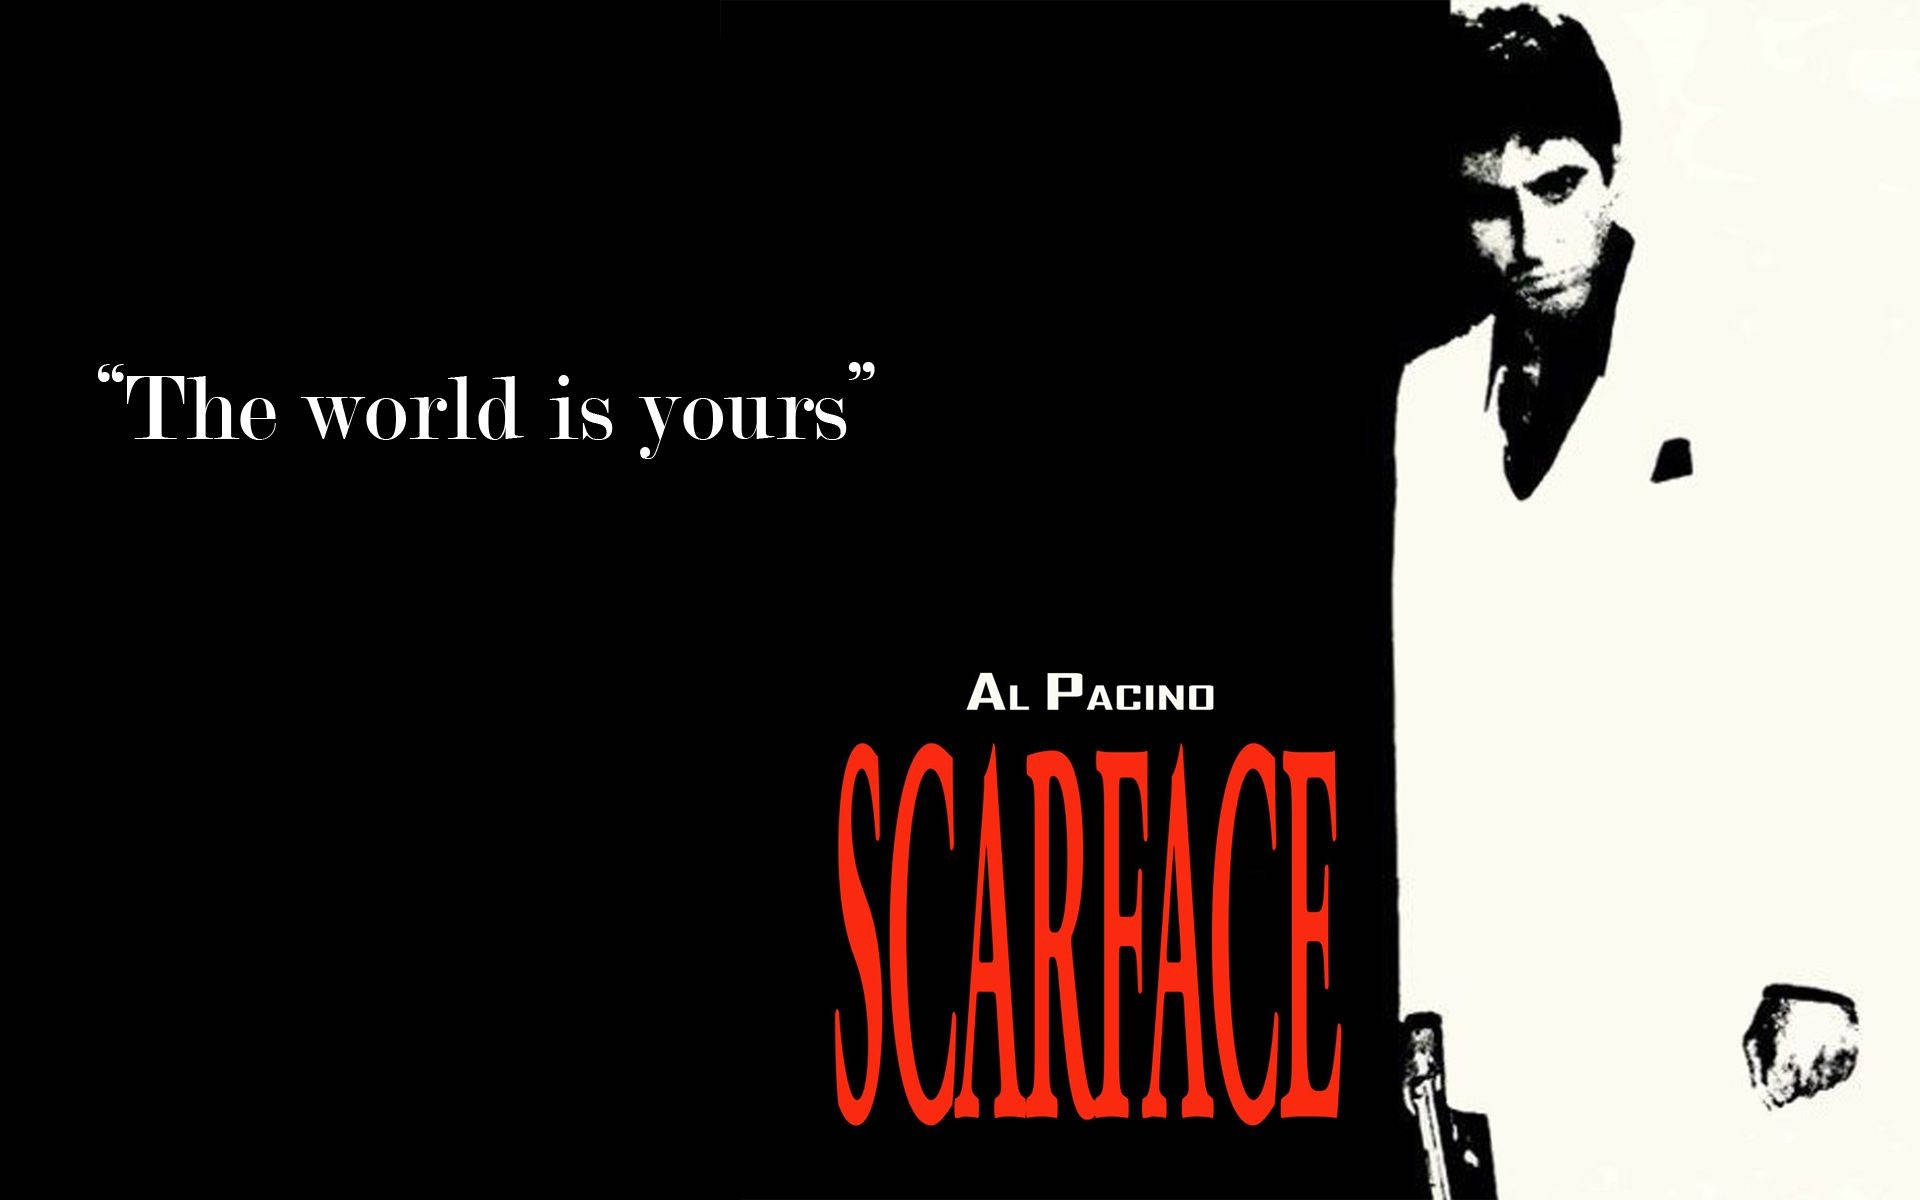 Picture Scarface The World is Yours Games